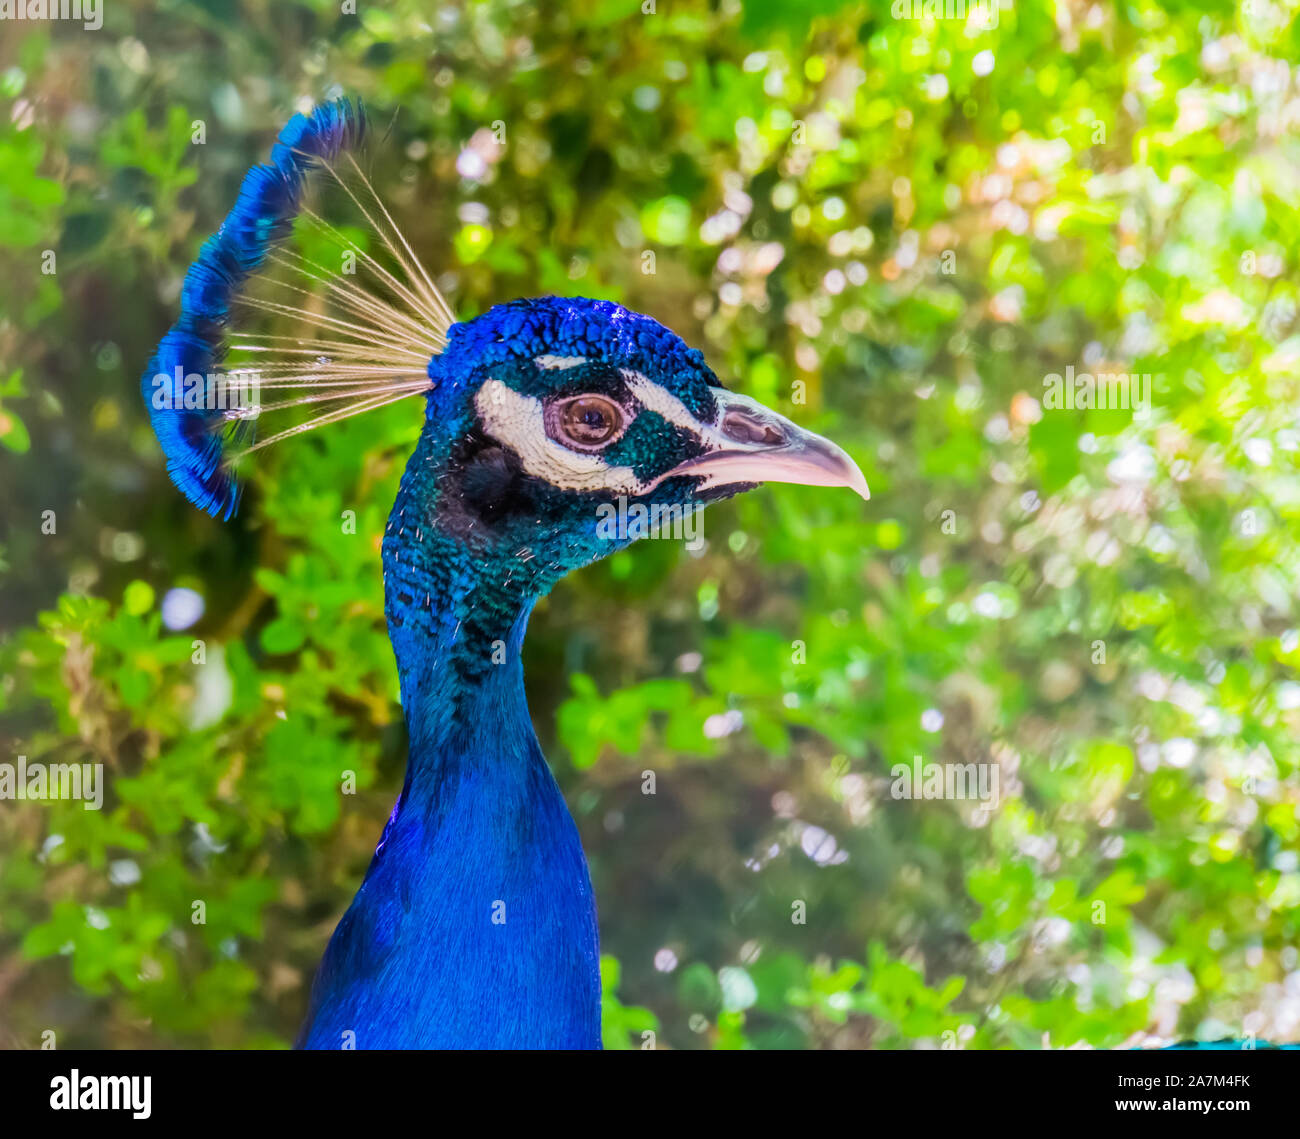 closeup of the face of a blue peafowl, colorful Indian peacock, popular ornamental bird specie Stock Photo